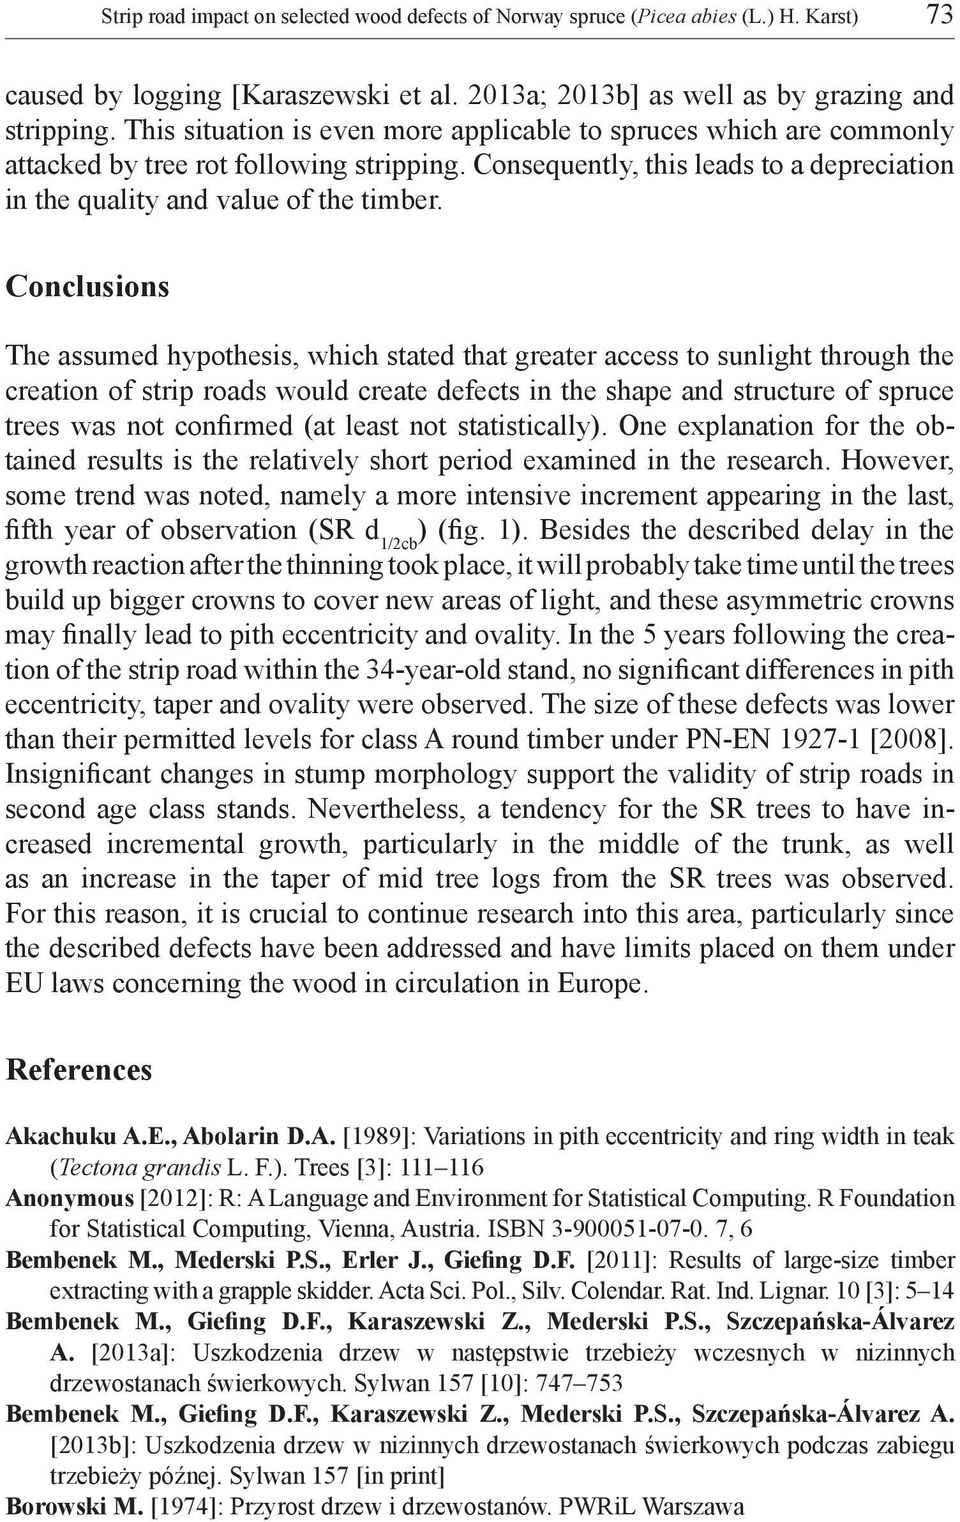 Conclusions The assumed hypothesis, which stated that greater access to sunlight through the creation of strip roads would create defects in the shape and structure of spruce trees was not confirmed